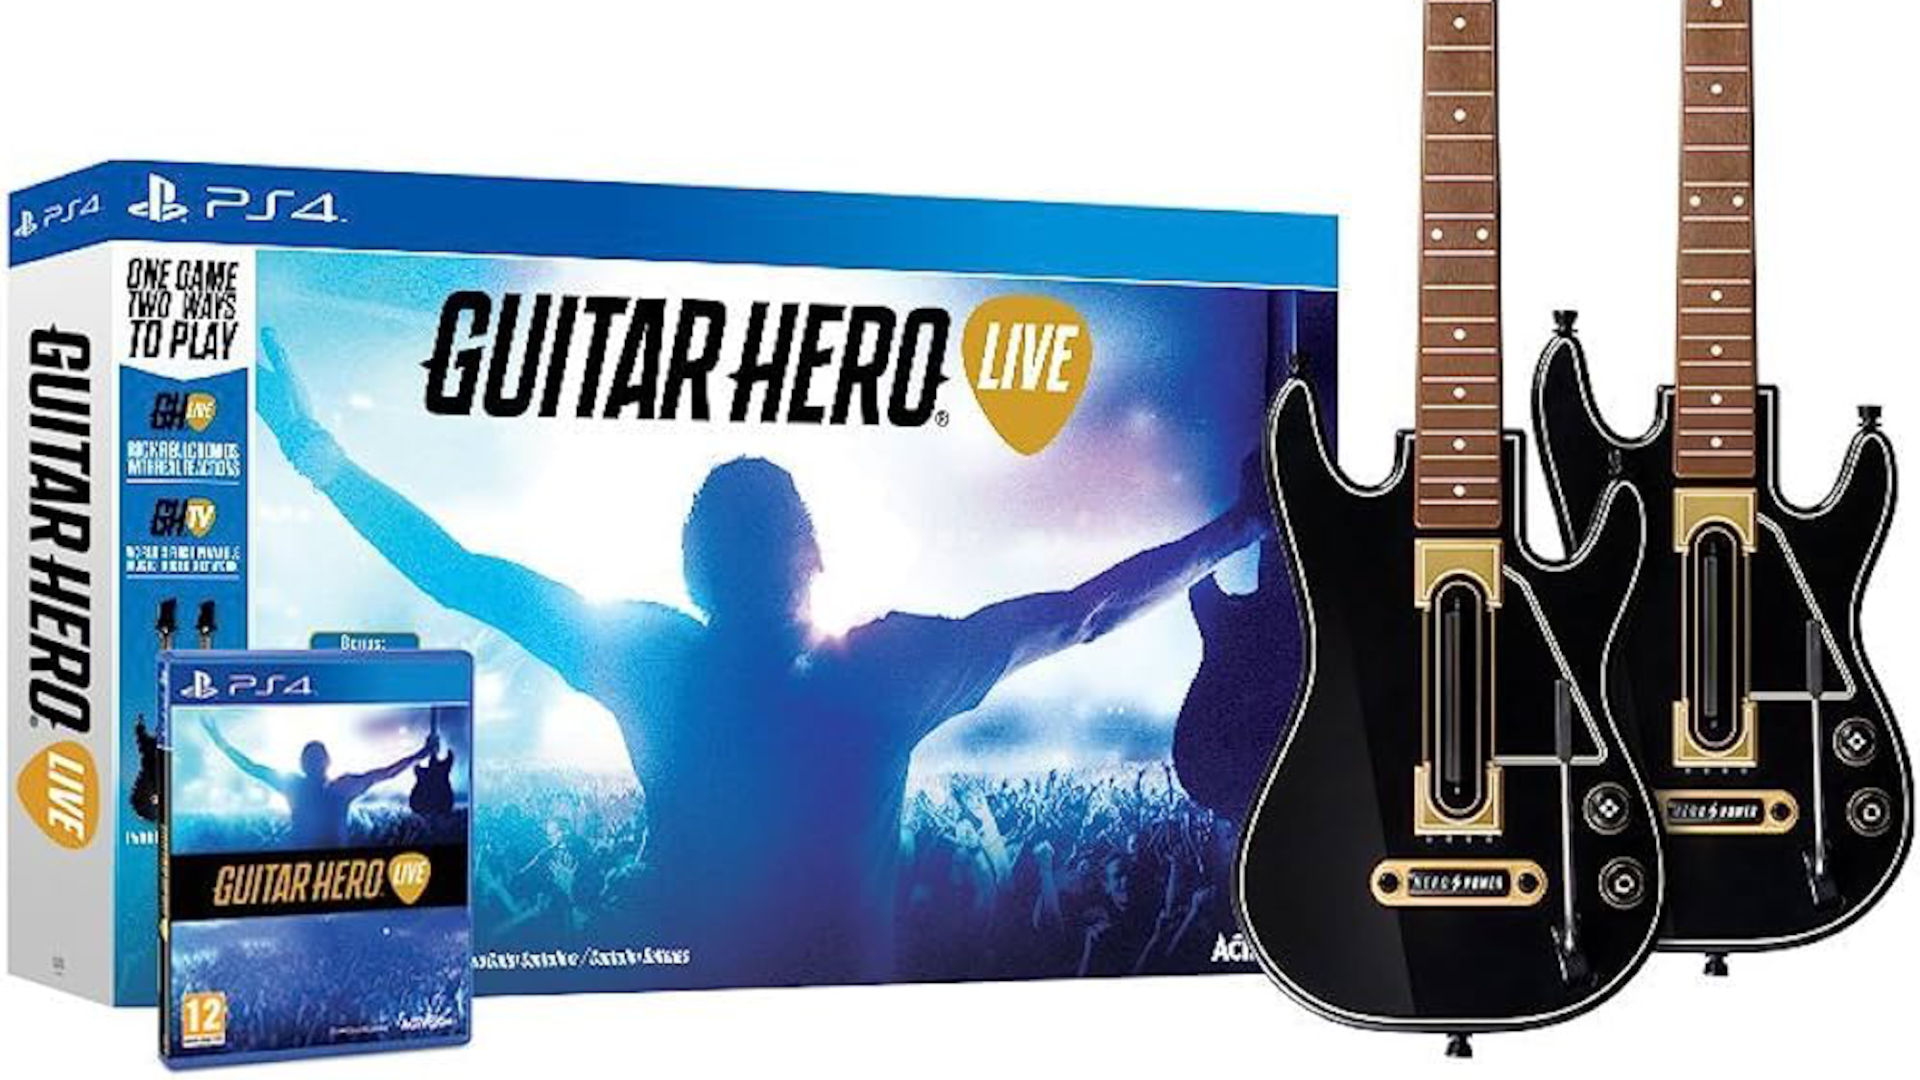 The official Guitar Hero Live box and guitar controllers.